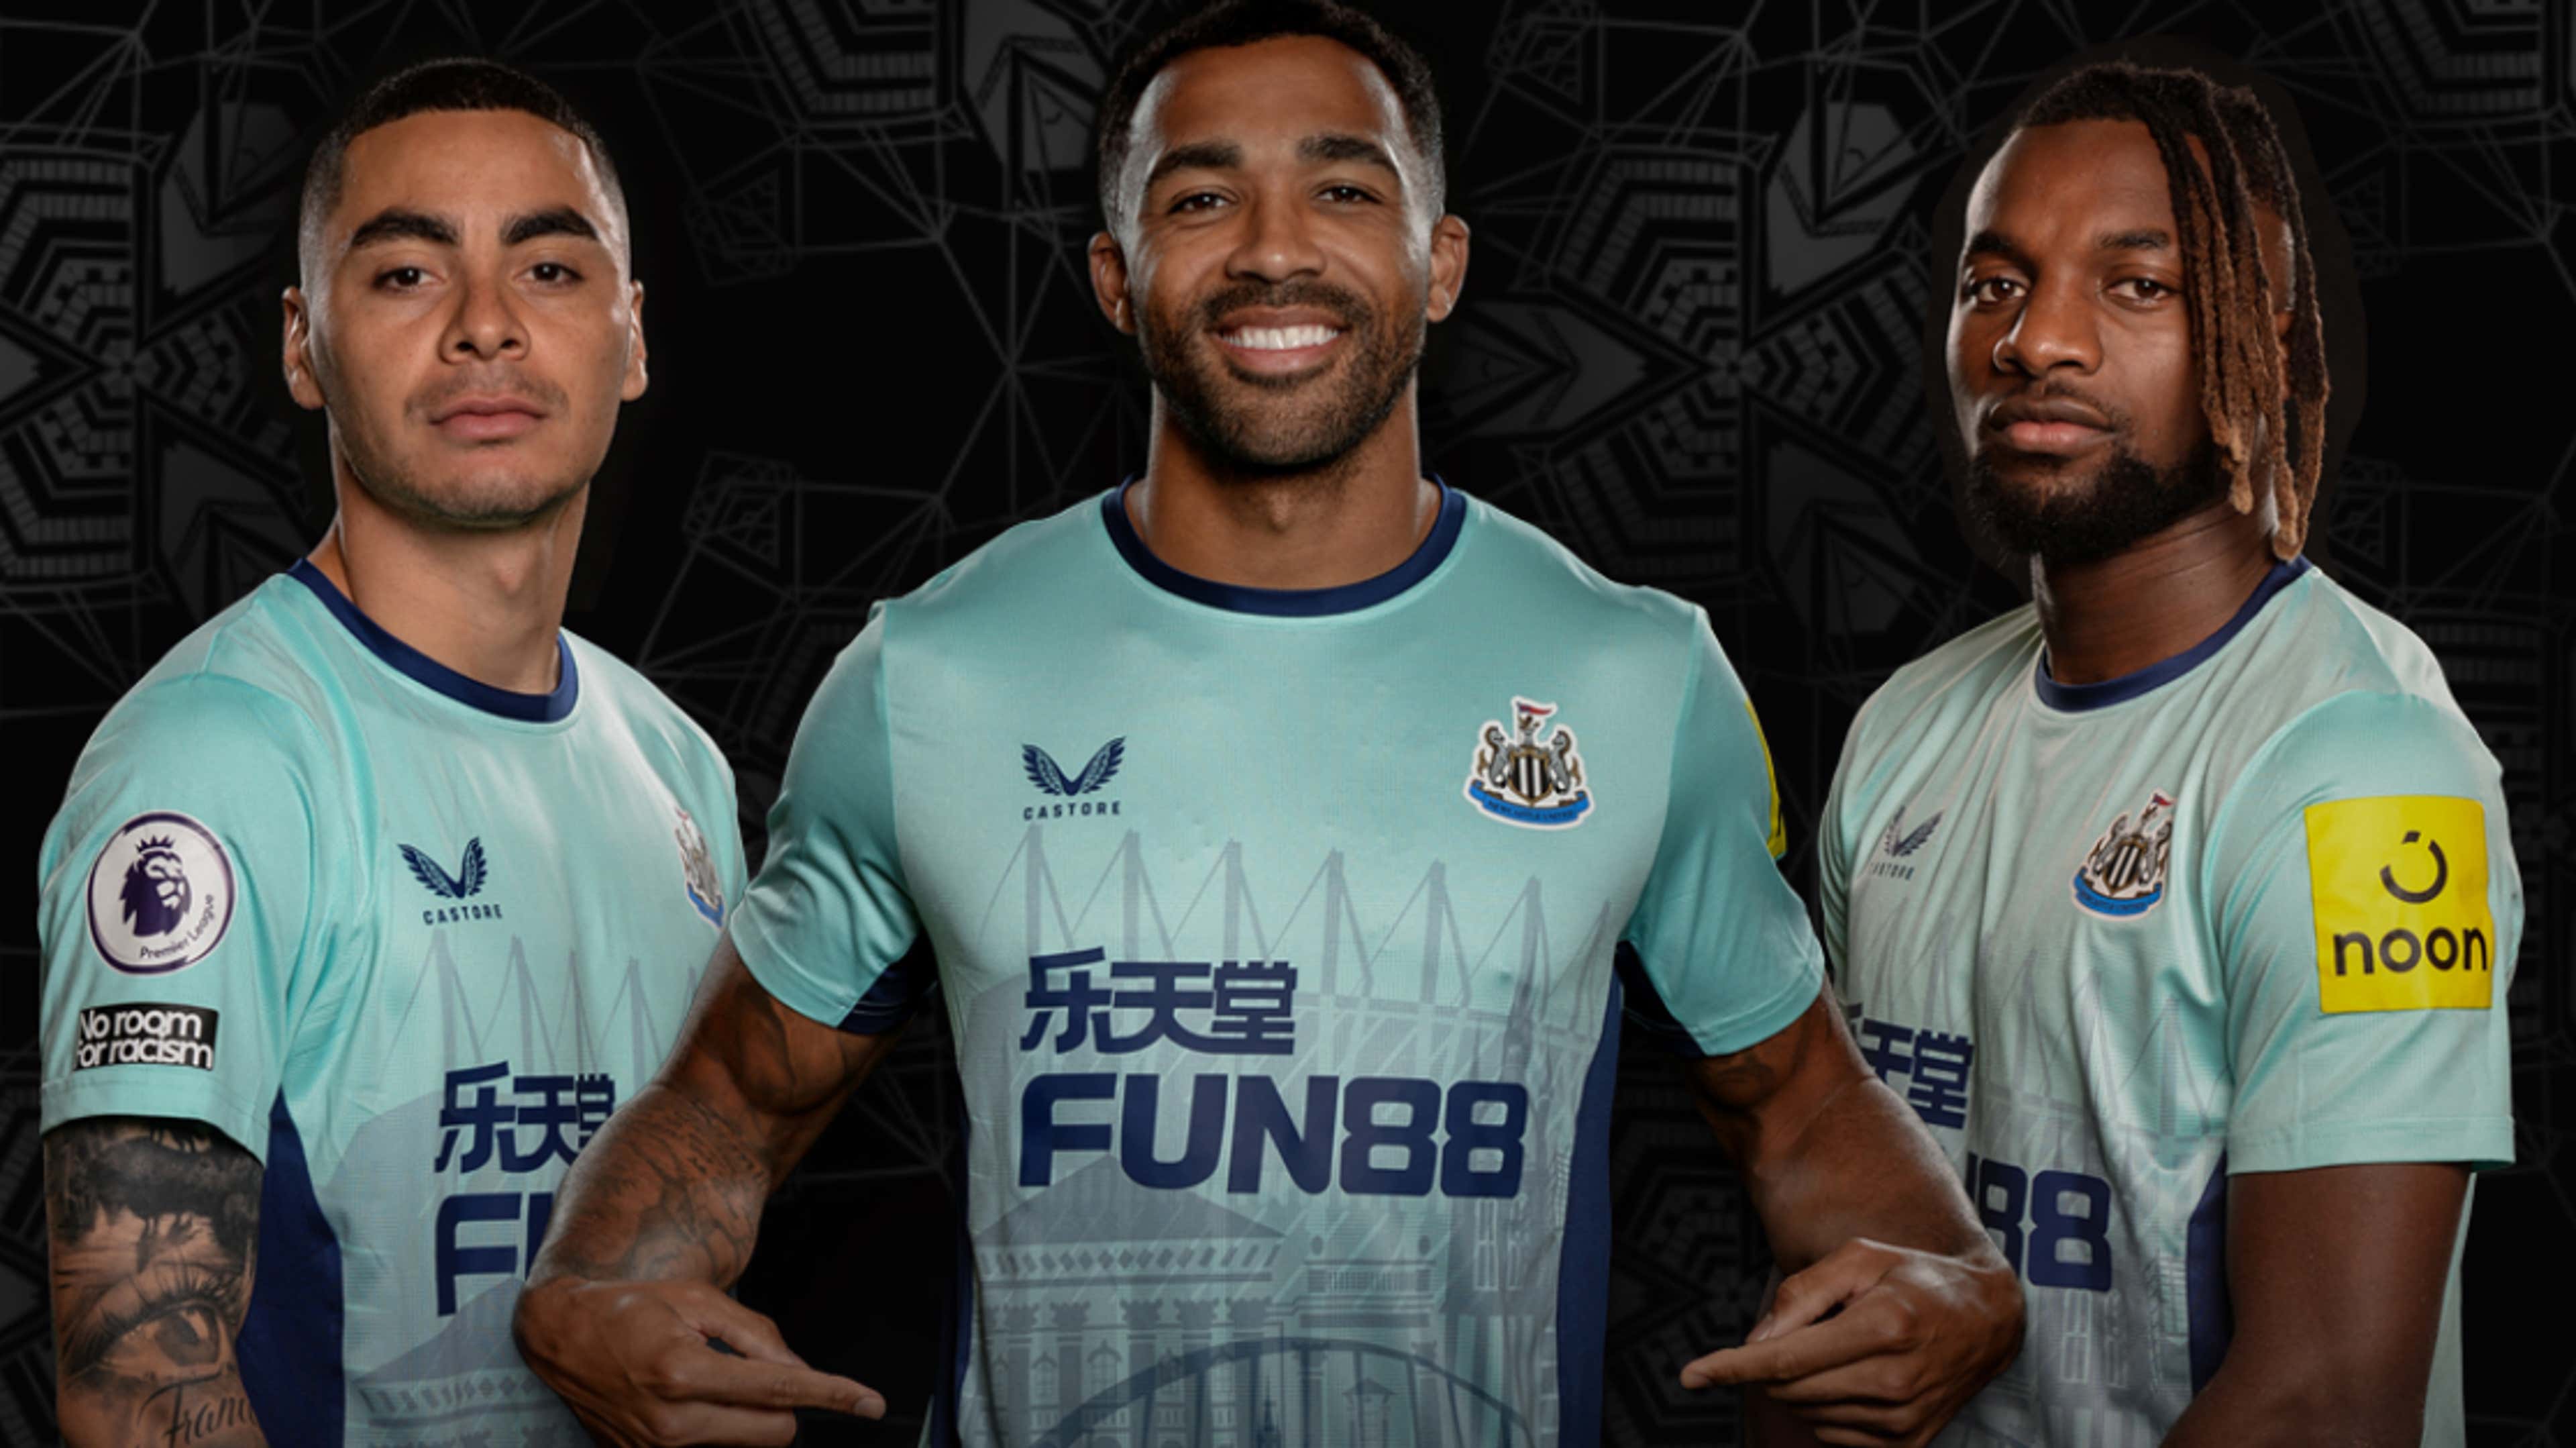 Newcastle United Wear Kit With Plain White Back in Champions